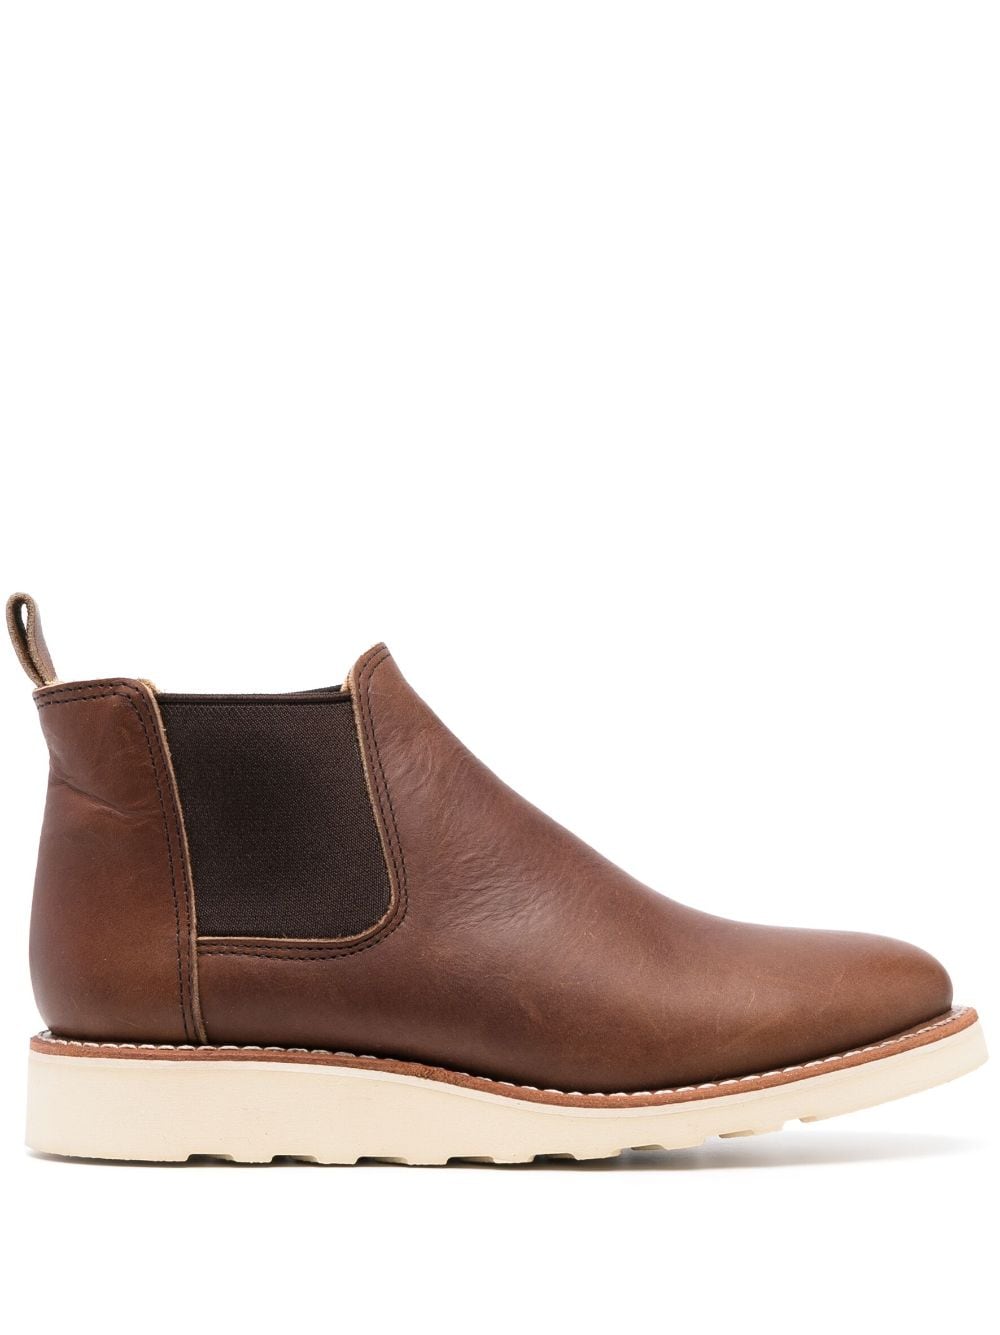 Red Wing Shoes classic Chelsea boots - Brown von Red Wing Shoes